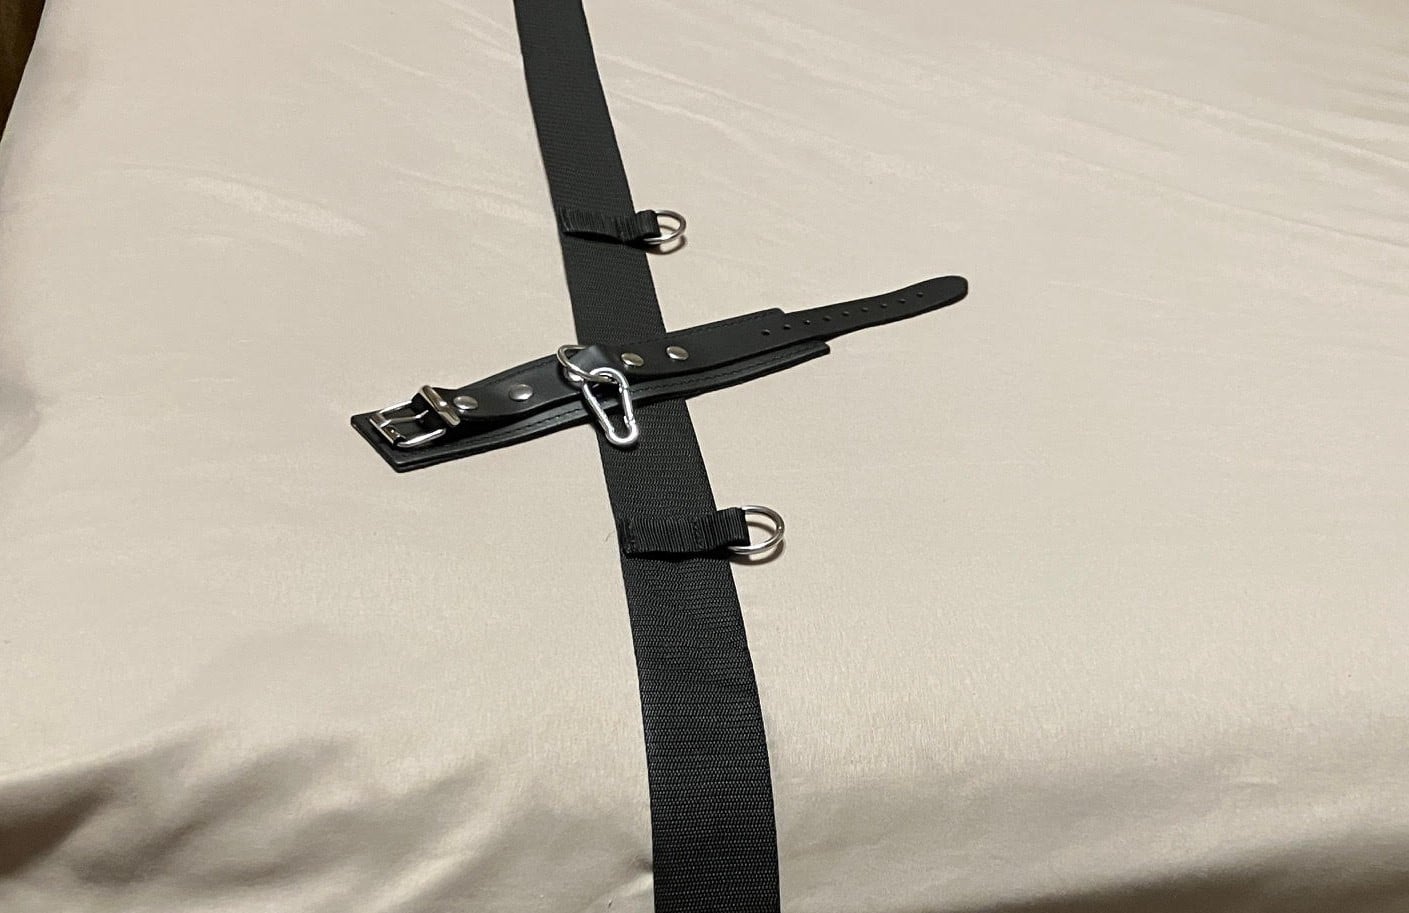 DOMINIX Deluxe Adjustable Leather Cuff Under Mattress Set Evaluating the Price Point of the DOMINIX Deluxe Adjustable Leather Cuff Under Mattress Set